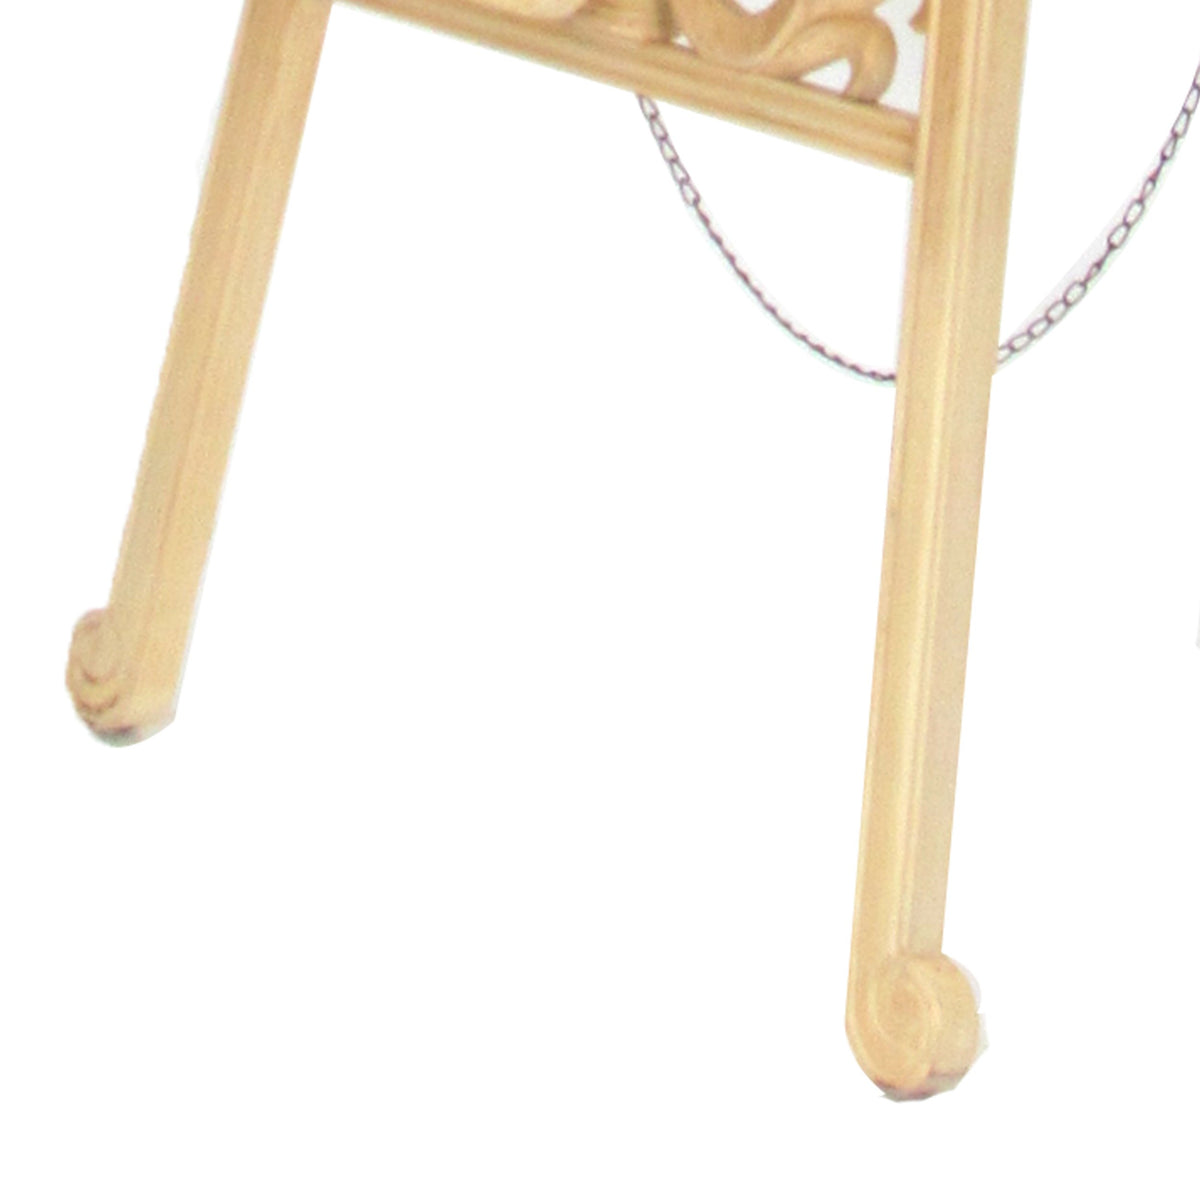 Traditional Style Wooden Easel with Scrollwork Details, Antique White - BM210460